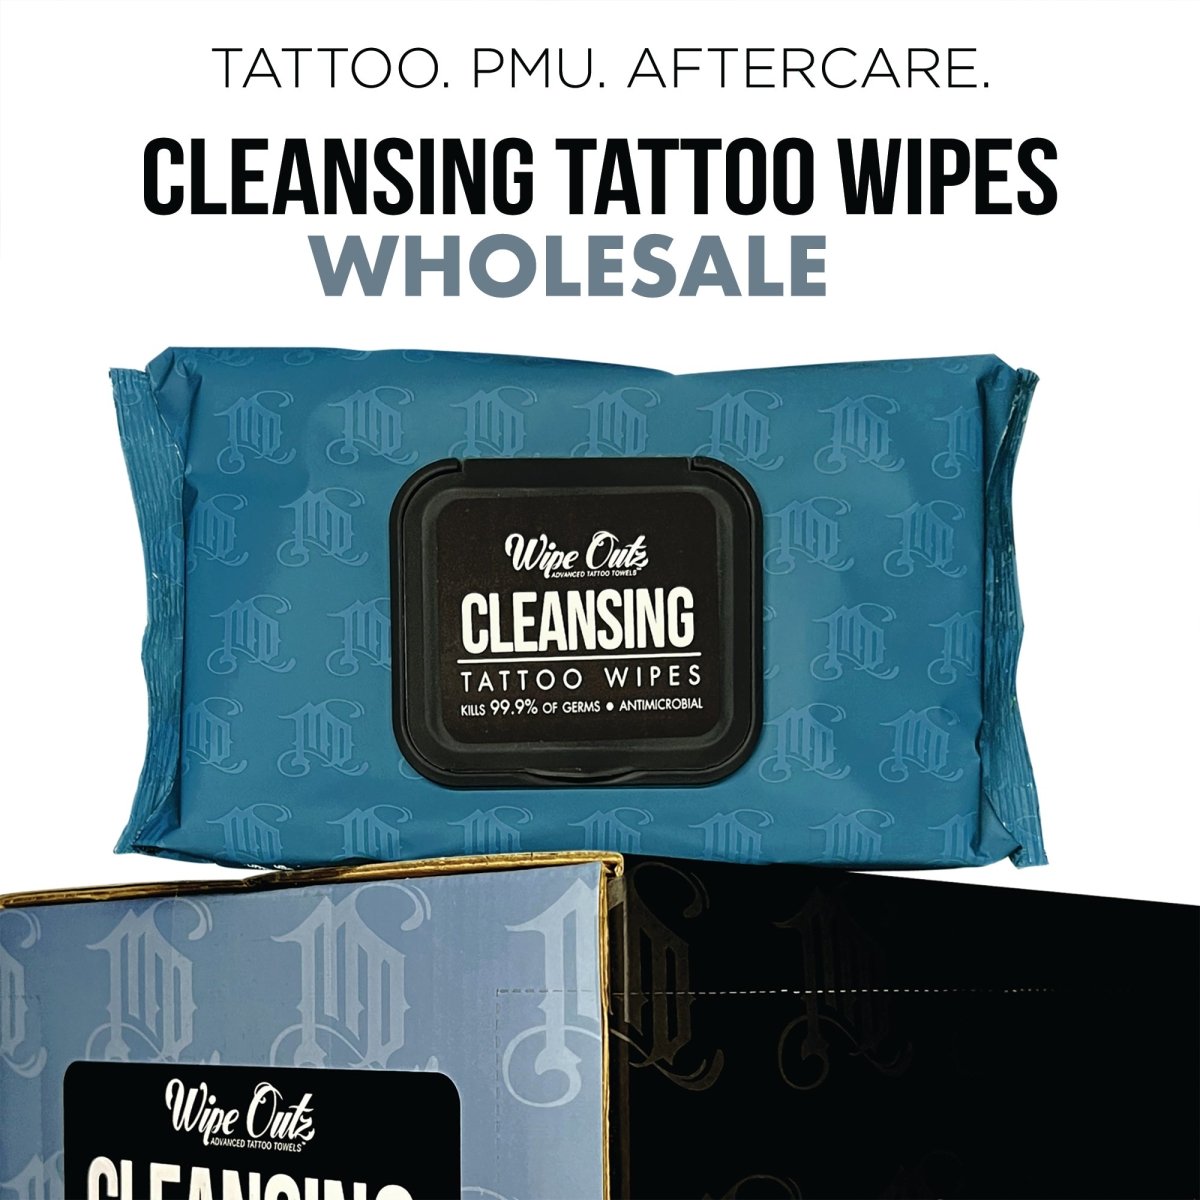 cleansing tattoo wipes wholesale